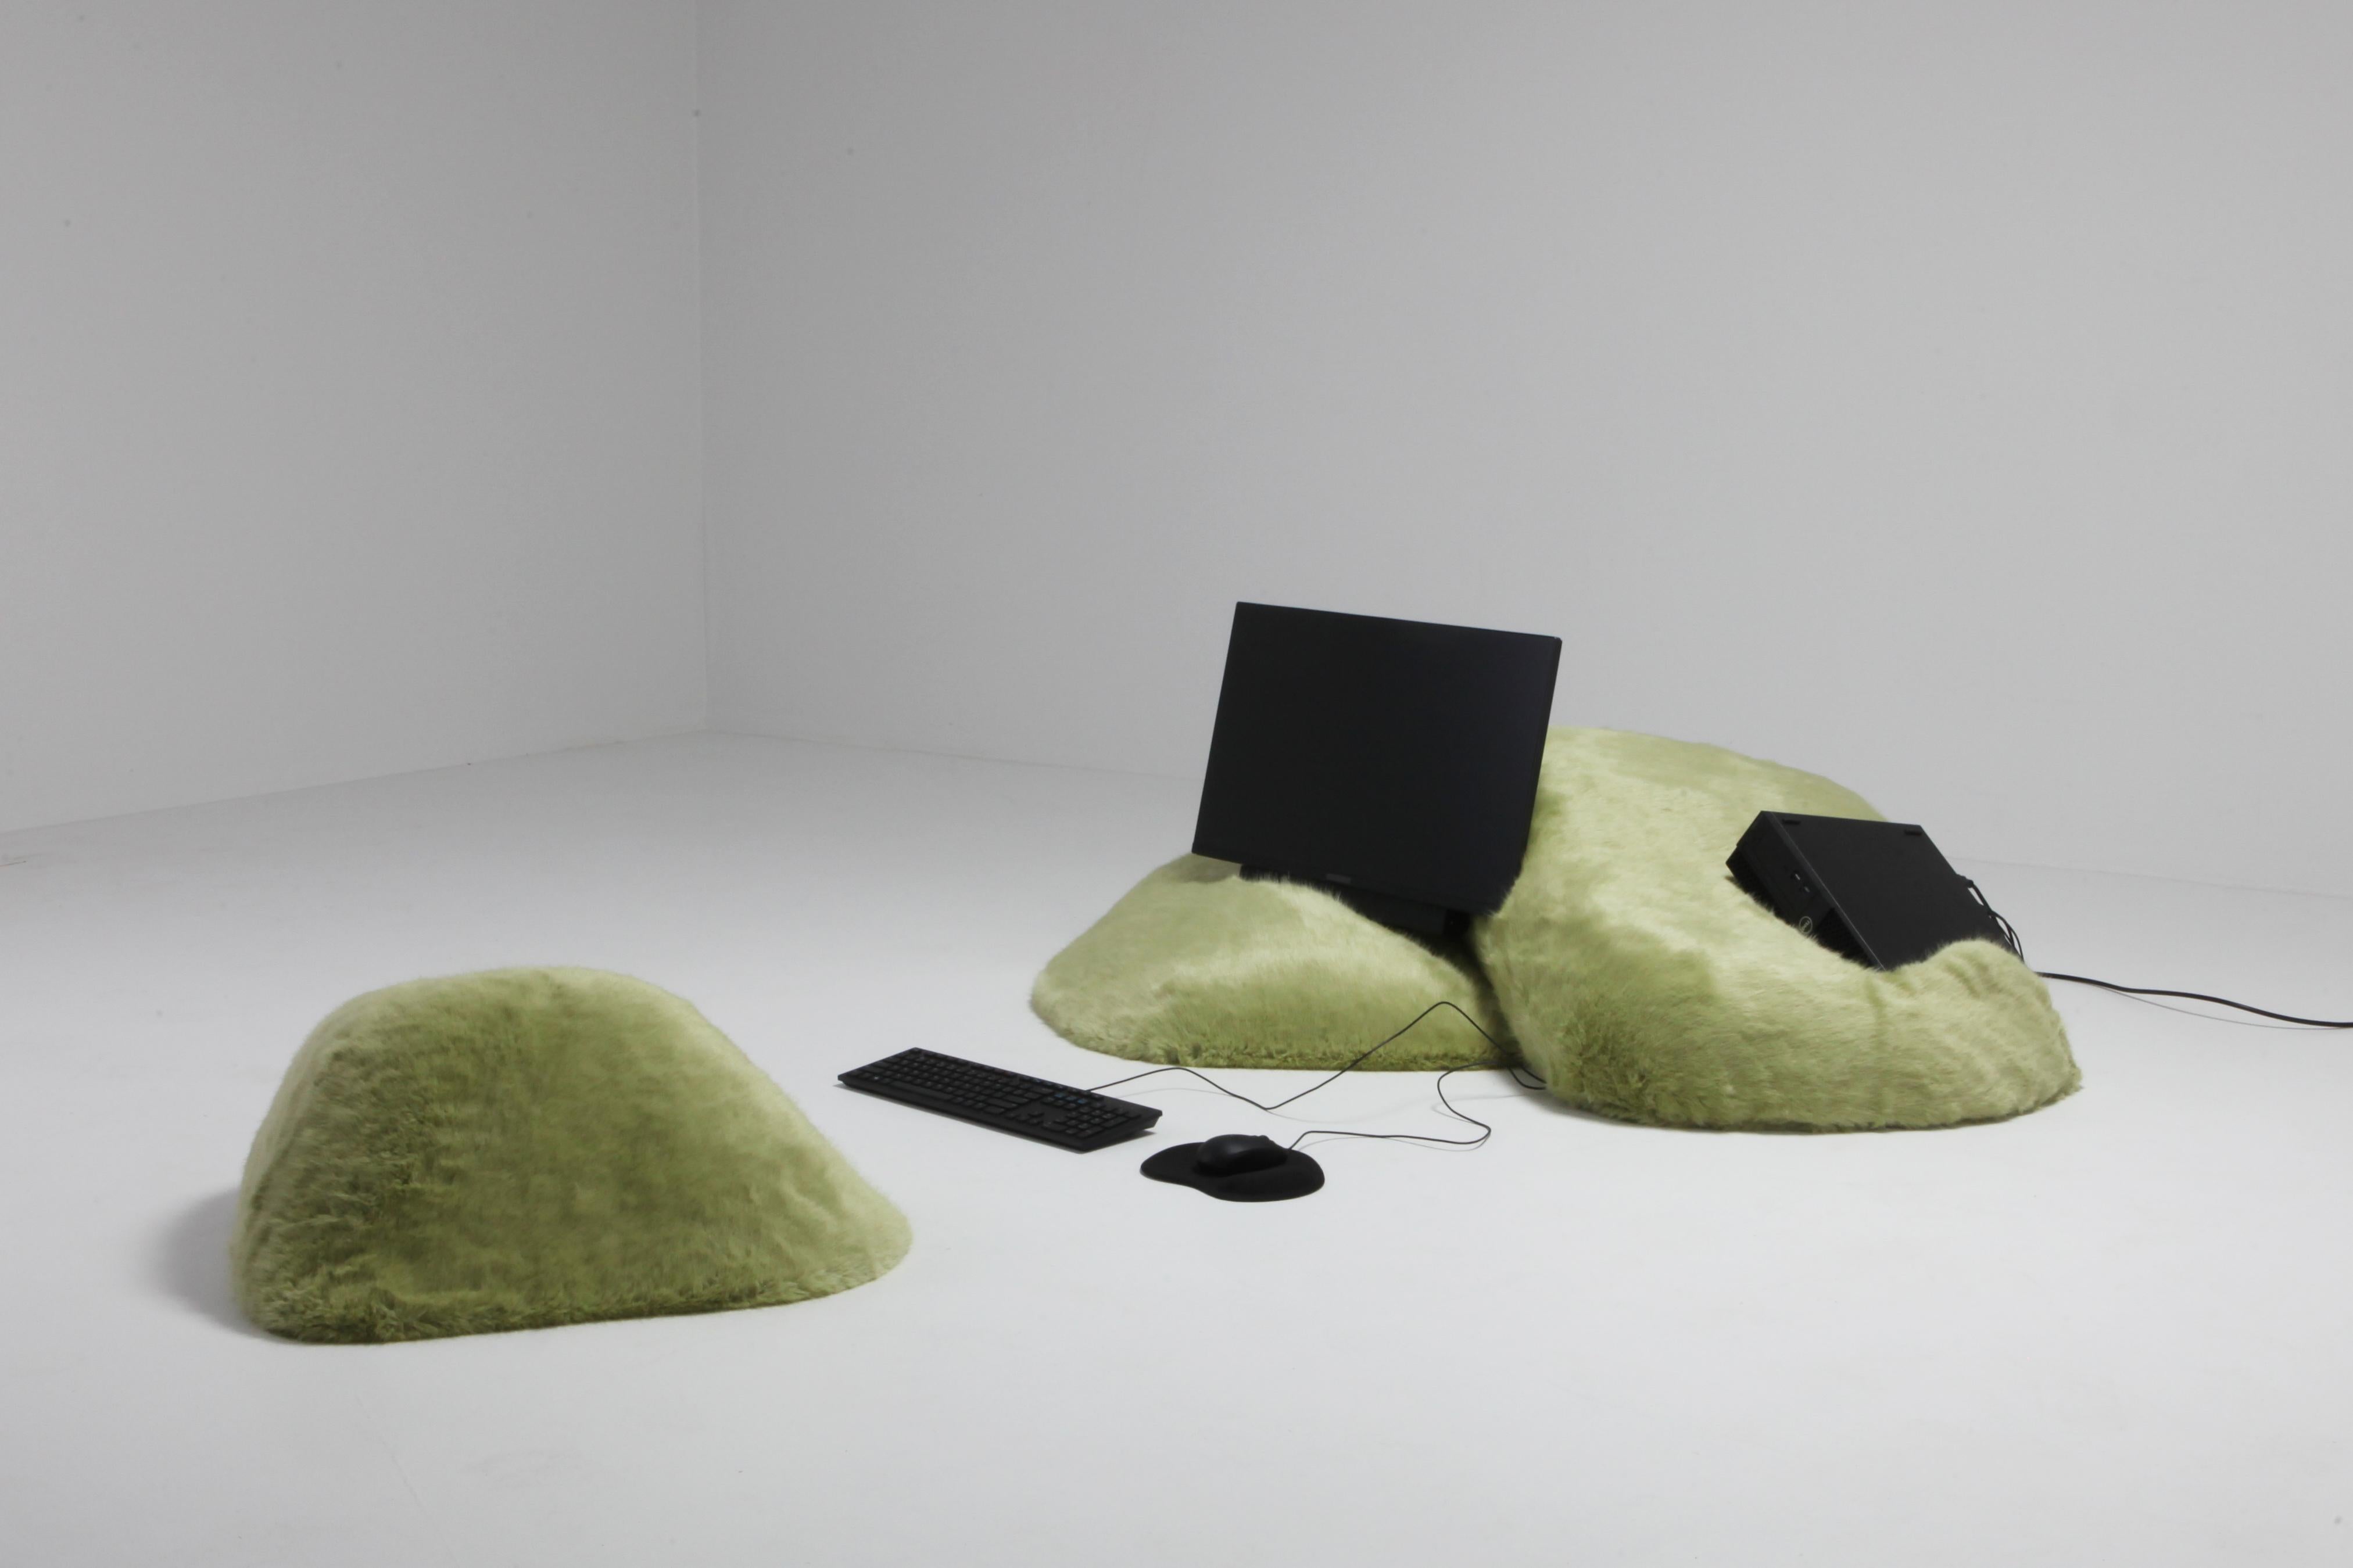 Pillow computer (prototype)
Sizes: width 137 cm, depth 109 cm, height 37 cm material: wood, PU-foam, faux fur, car paint, computer edition: prototype, unique piece. 

Schimmel & Schweikle have announced their solo exhibition 'A tree full of